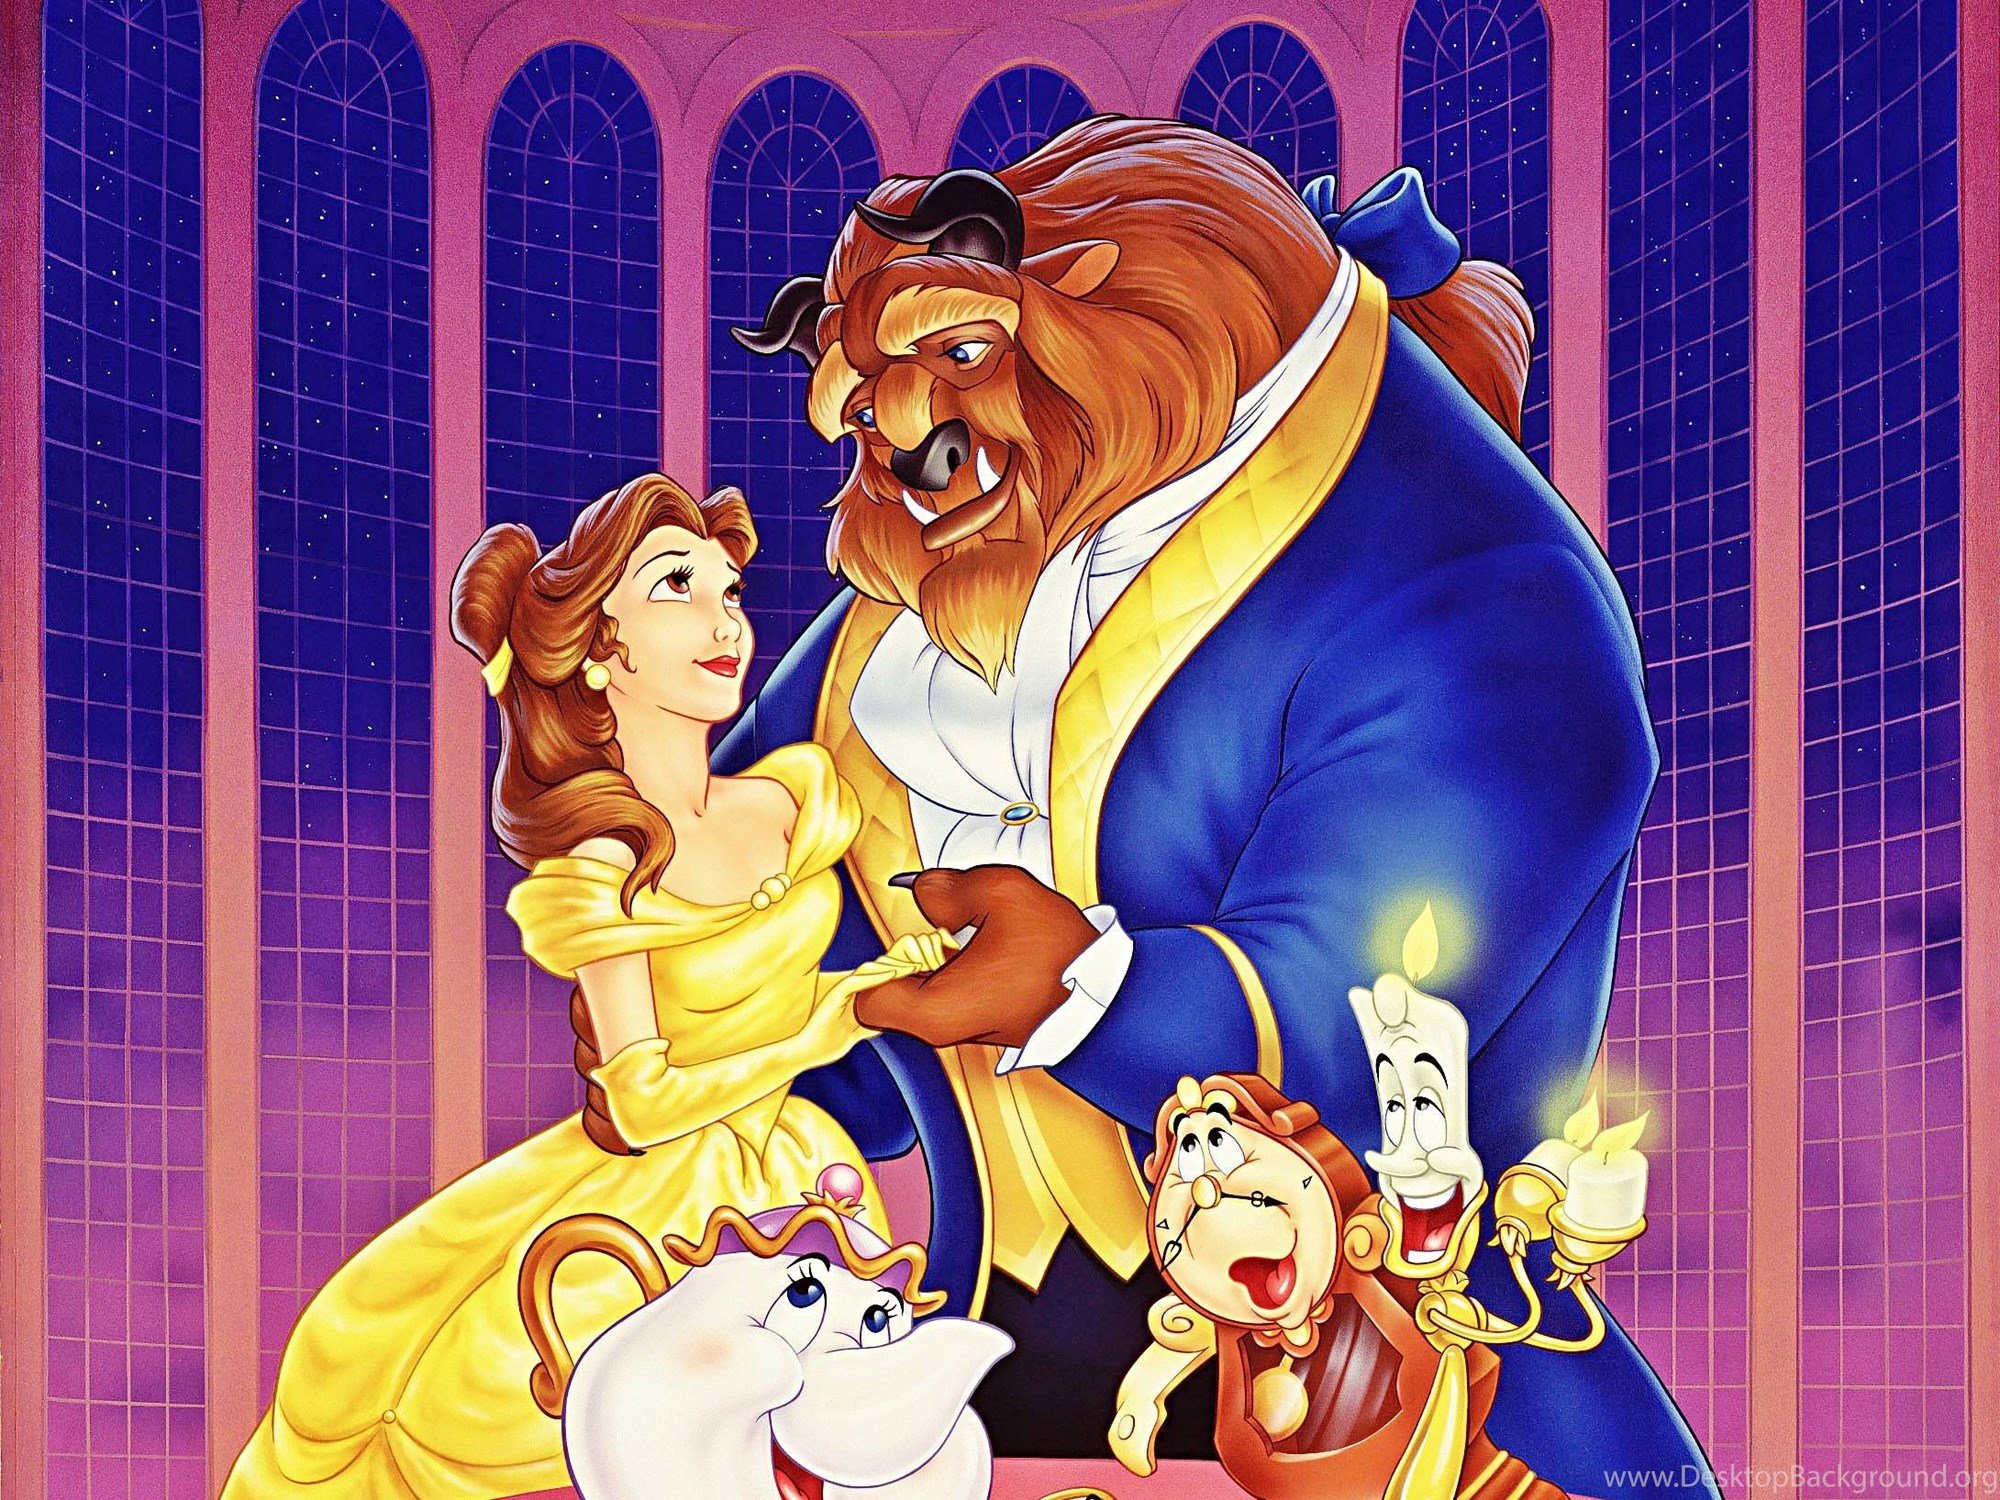 Beauty and the beast. Красавица и чудовище 1991. Красавица и чудовище - Beauty and the Beast (1991). Красавица и чудовище Дисней. Красавица и чудовище 1991 Белль.